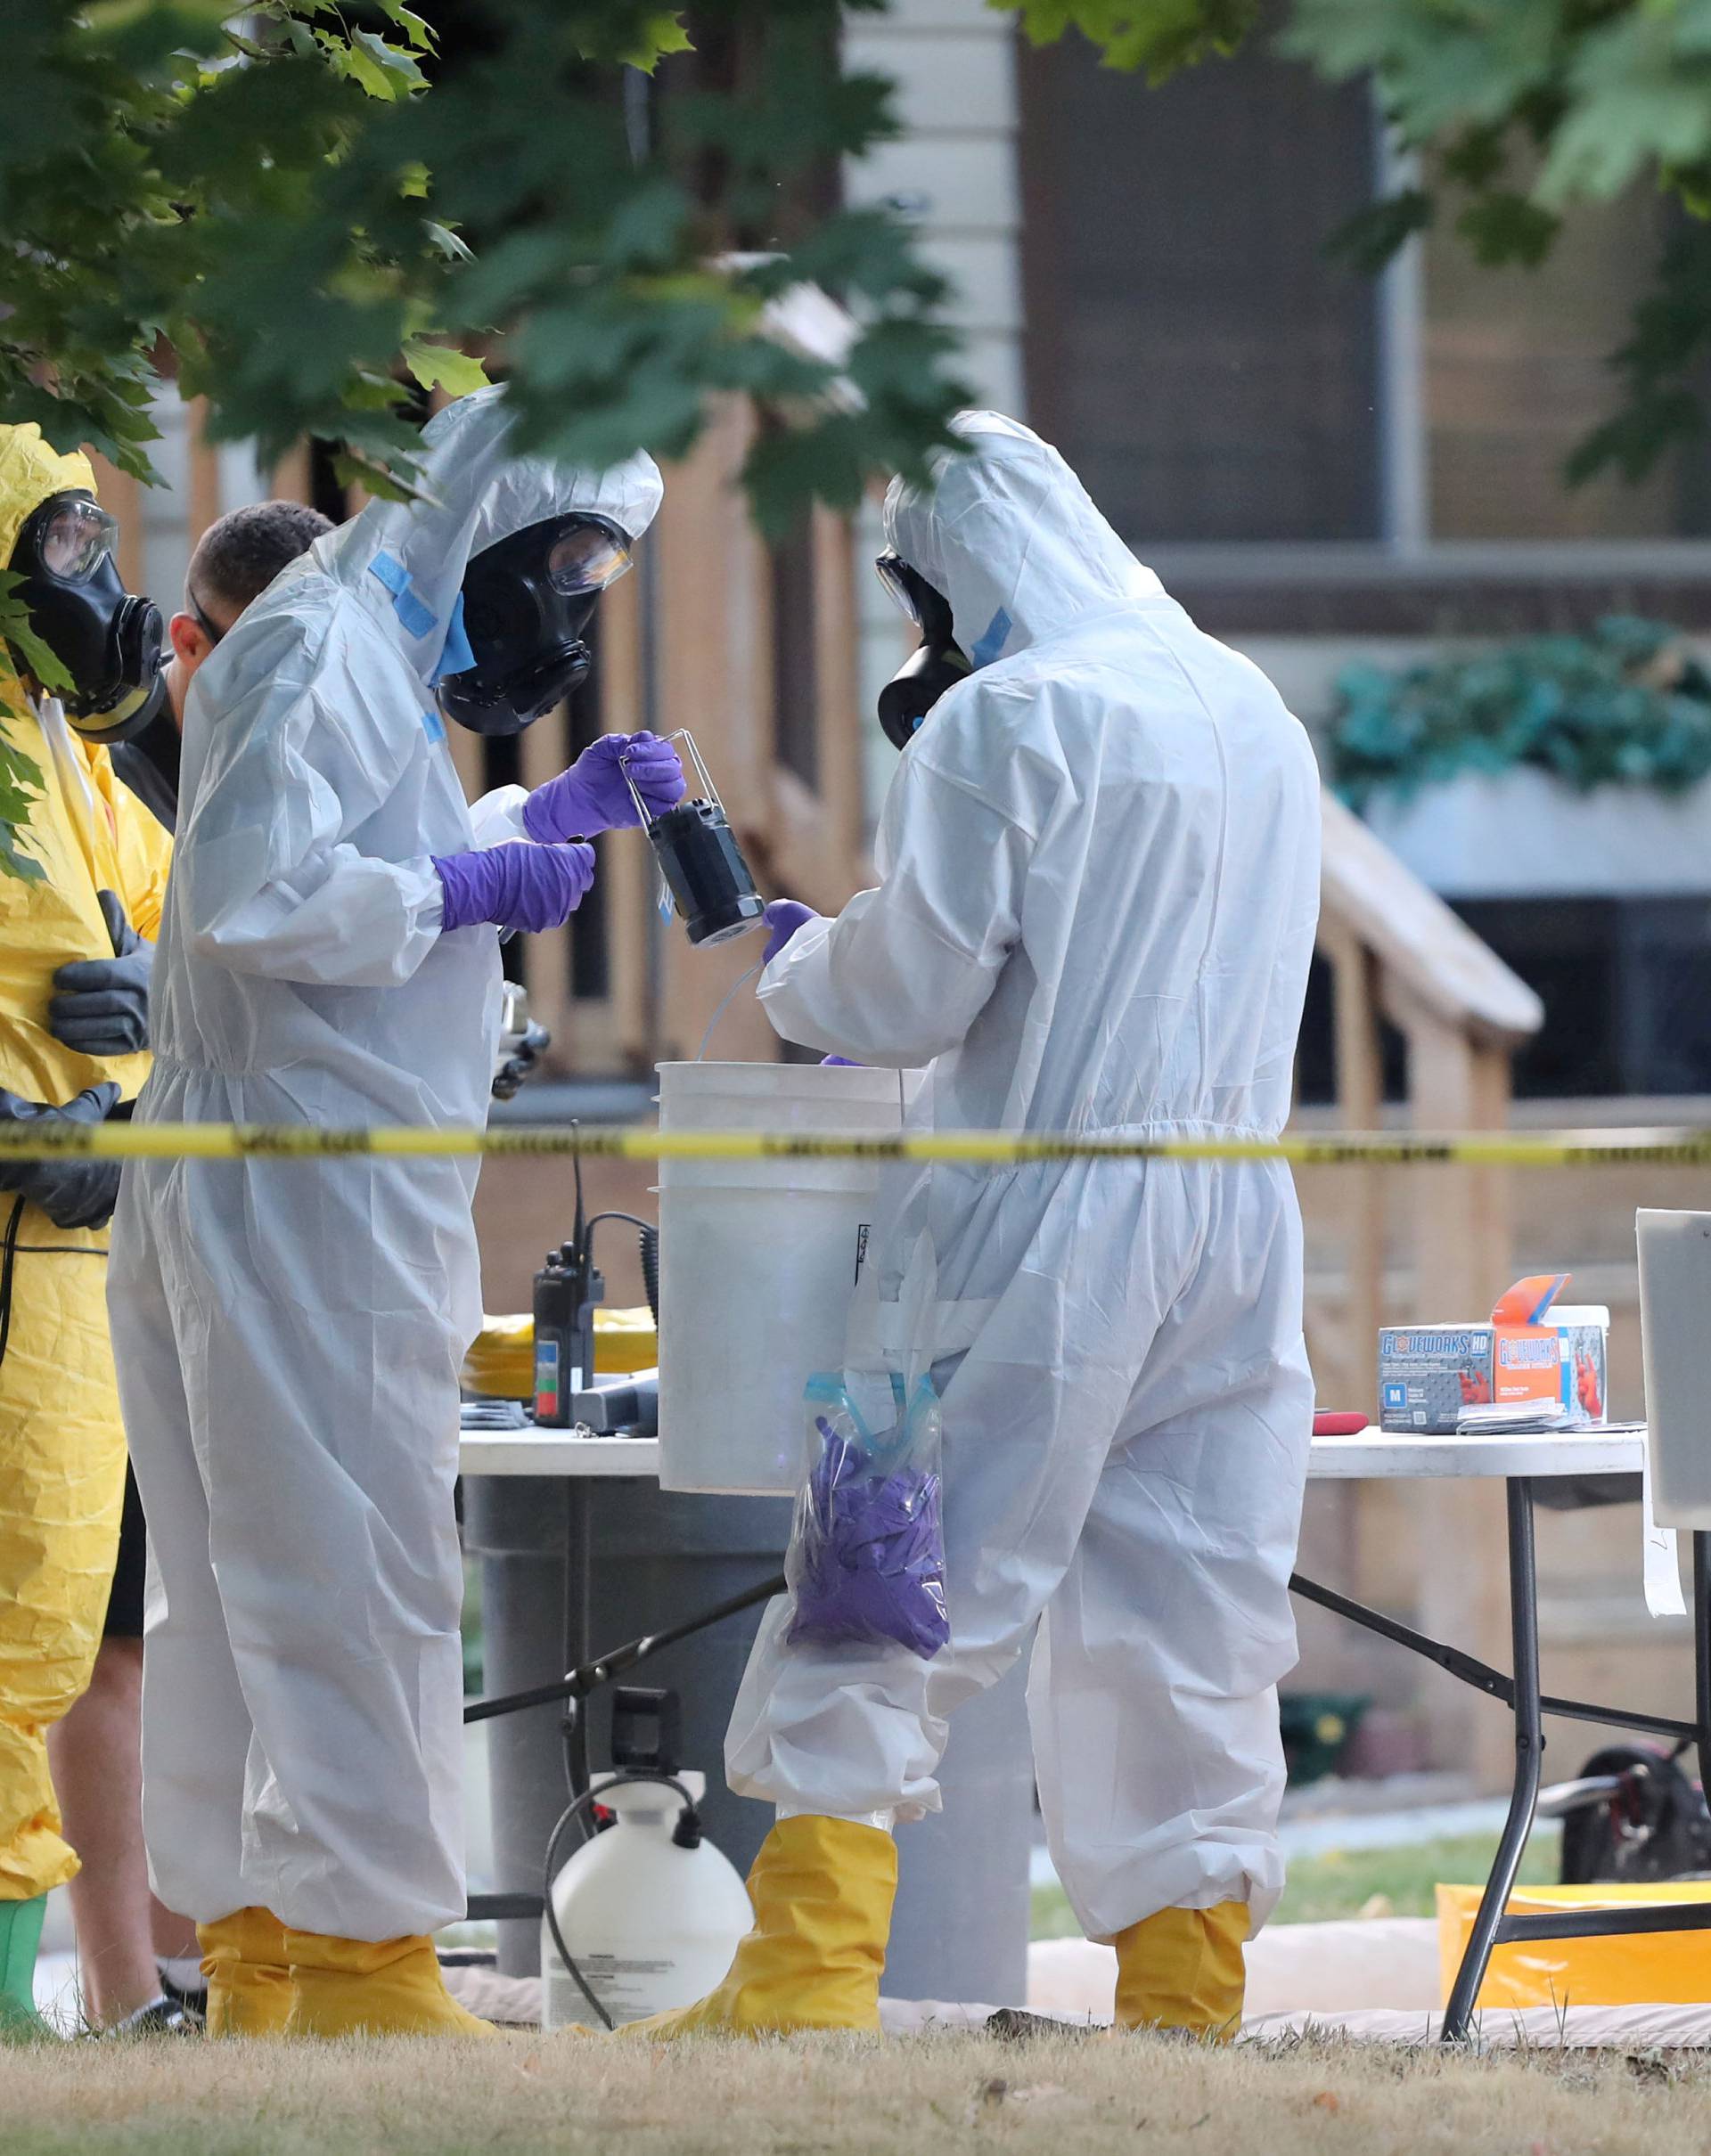 FILE PHOTO: FBI and law enforcement officers in hazmat suites prepare to enter a house which FBI says was investigating "potentially hazardous chemicals" in Logan